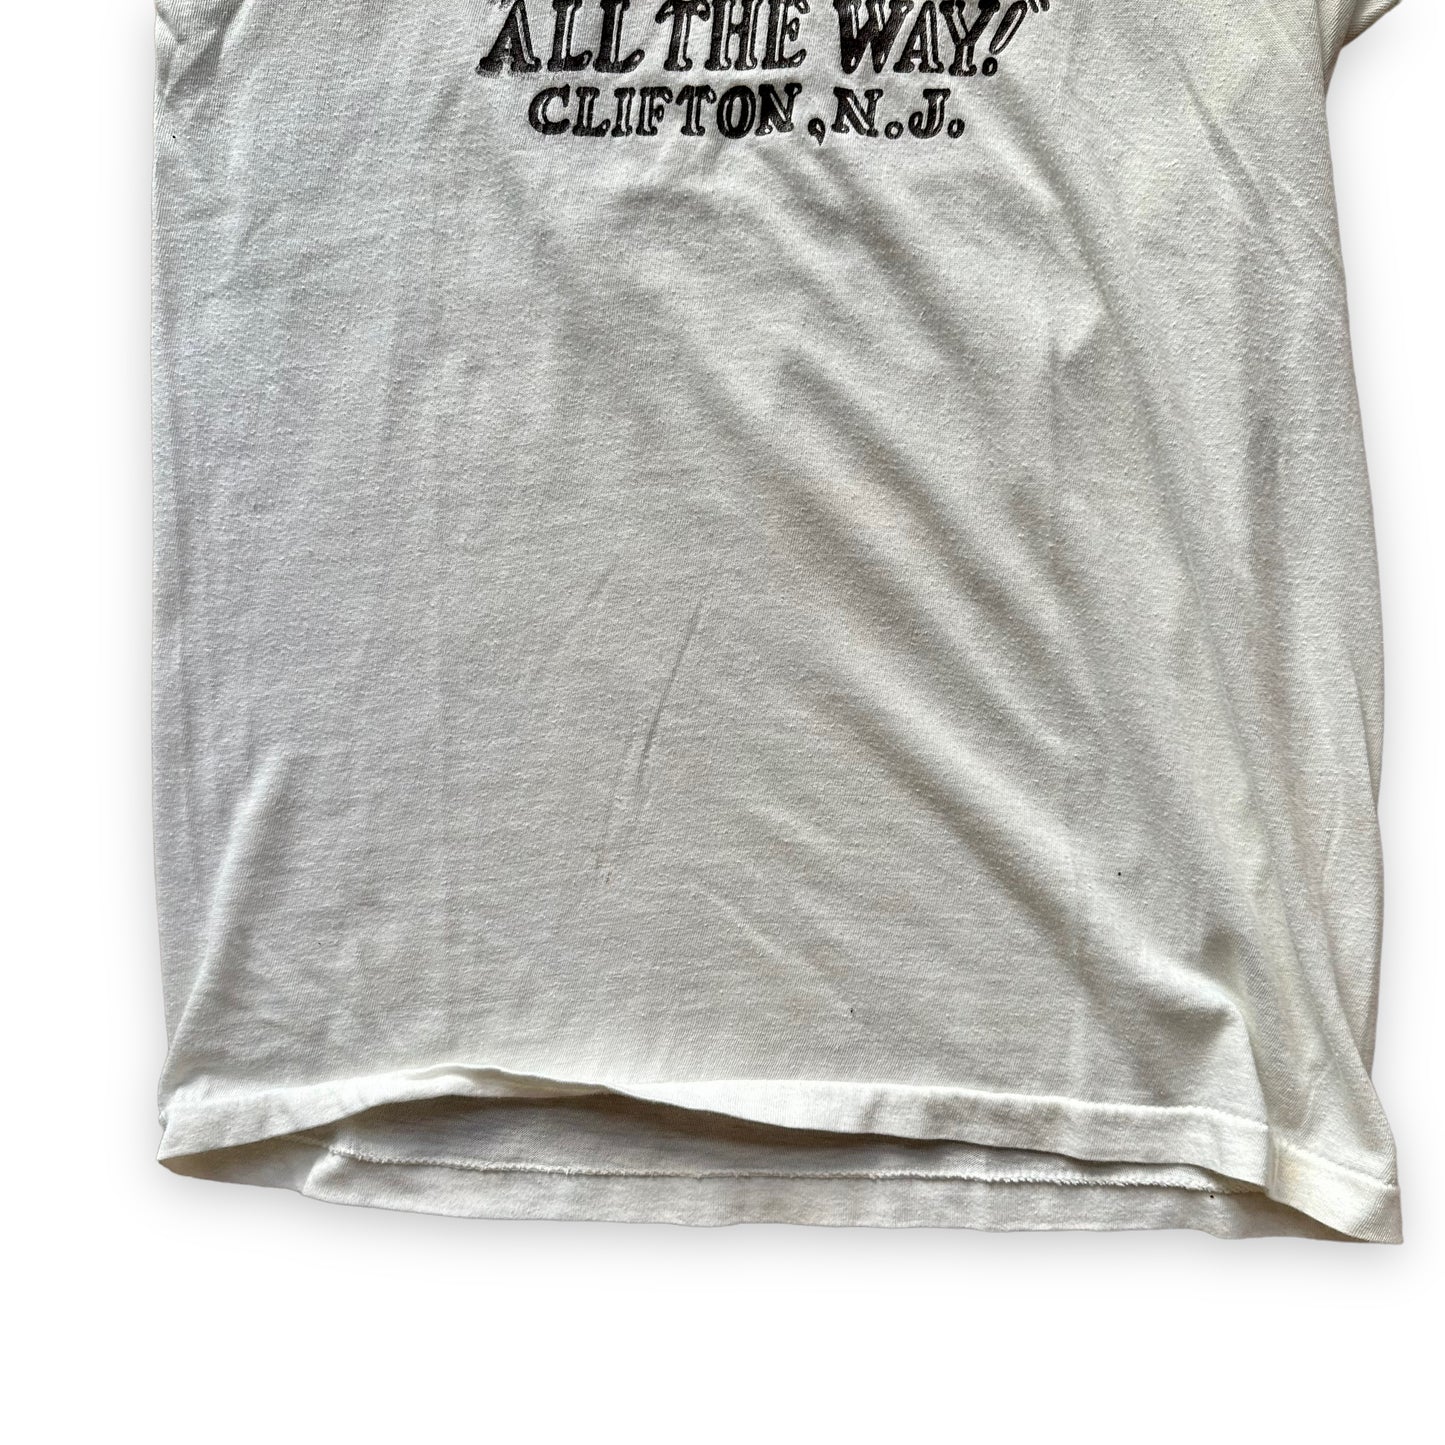 Lower Front View on Vintage Hot Grill "All The Way" Clifton NJ Hot Dog Tee SZ M |  Vintage Single Stitch T-Shirt | Barn Owl Vintage Seattle